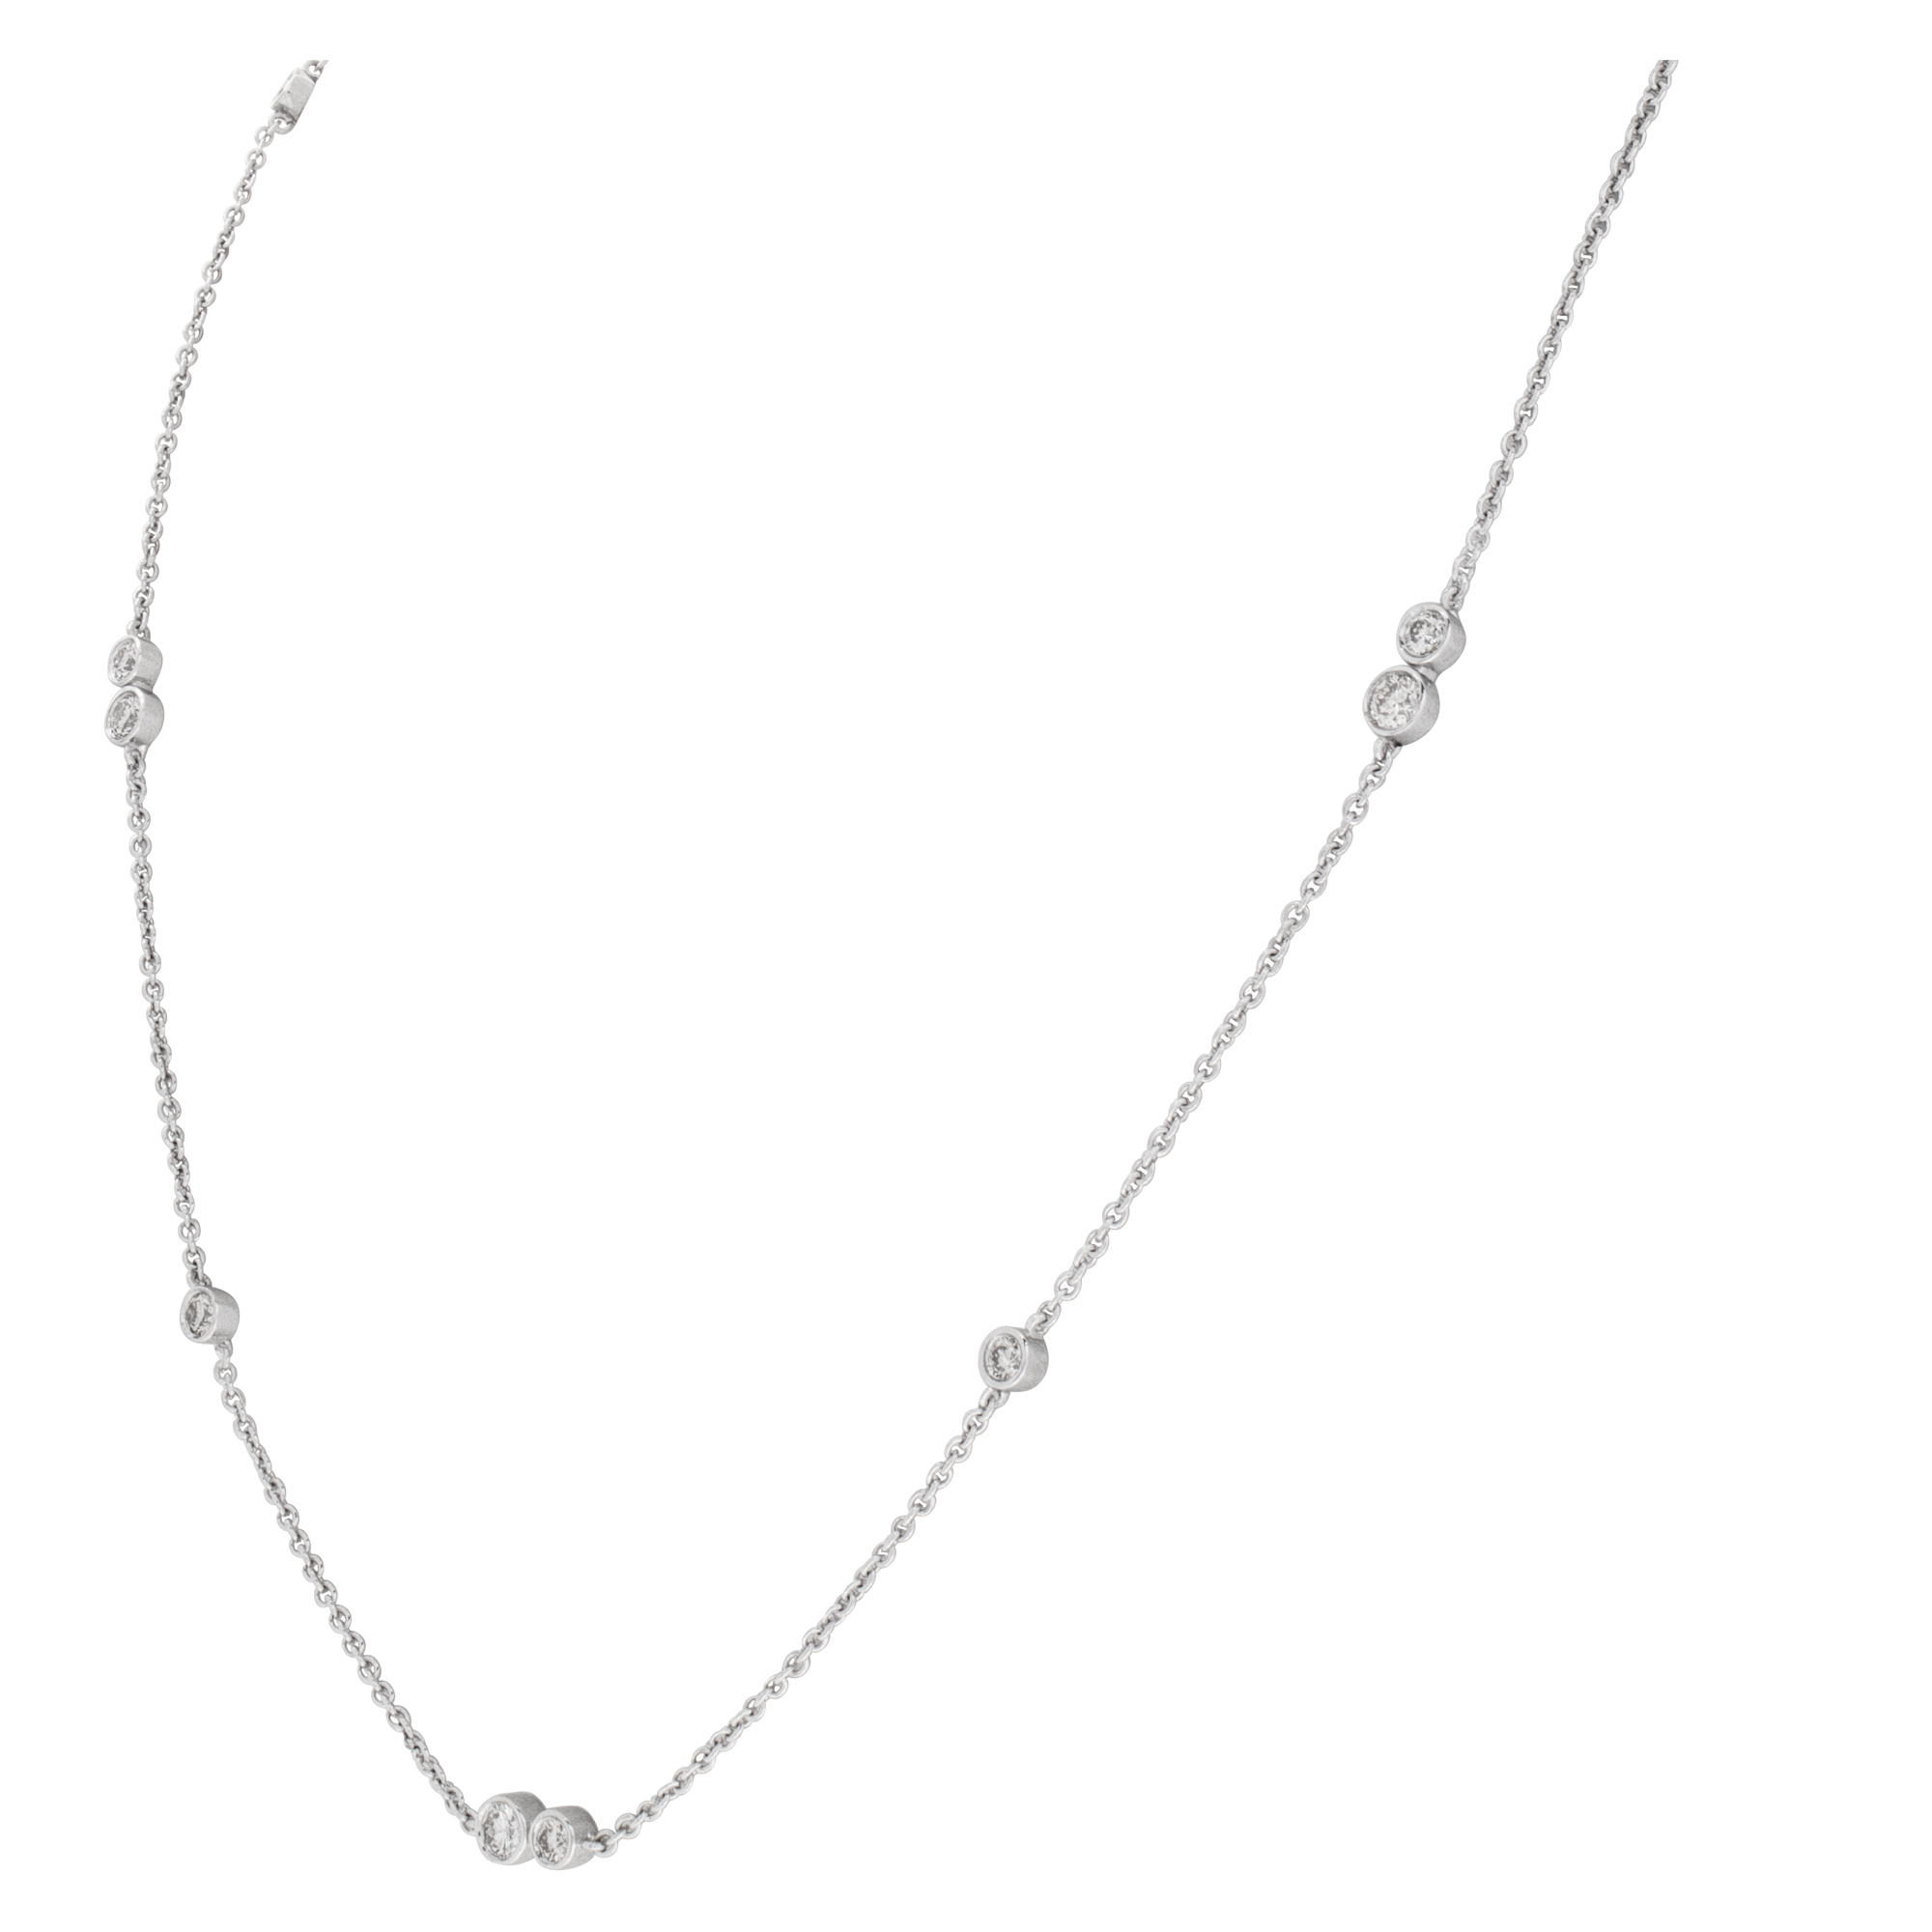 "Diamonds by the Yard" 18 inches chain with approx 1 carat total weight bezeled set, full cut round brilliant diamonds set in 18k white gold image 4